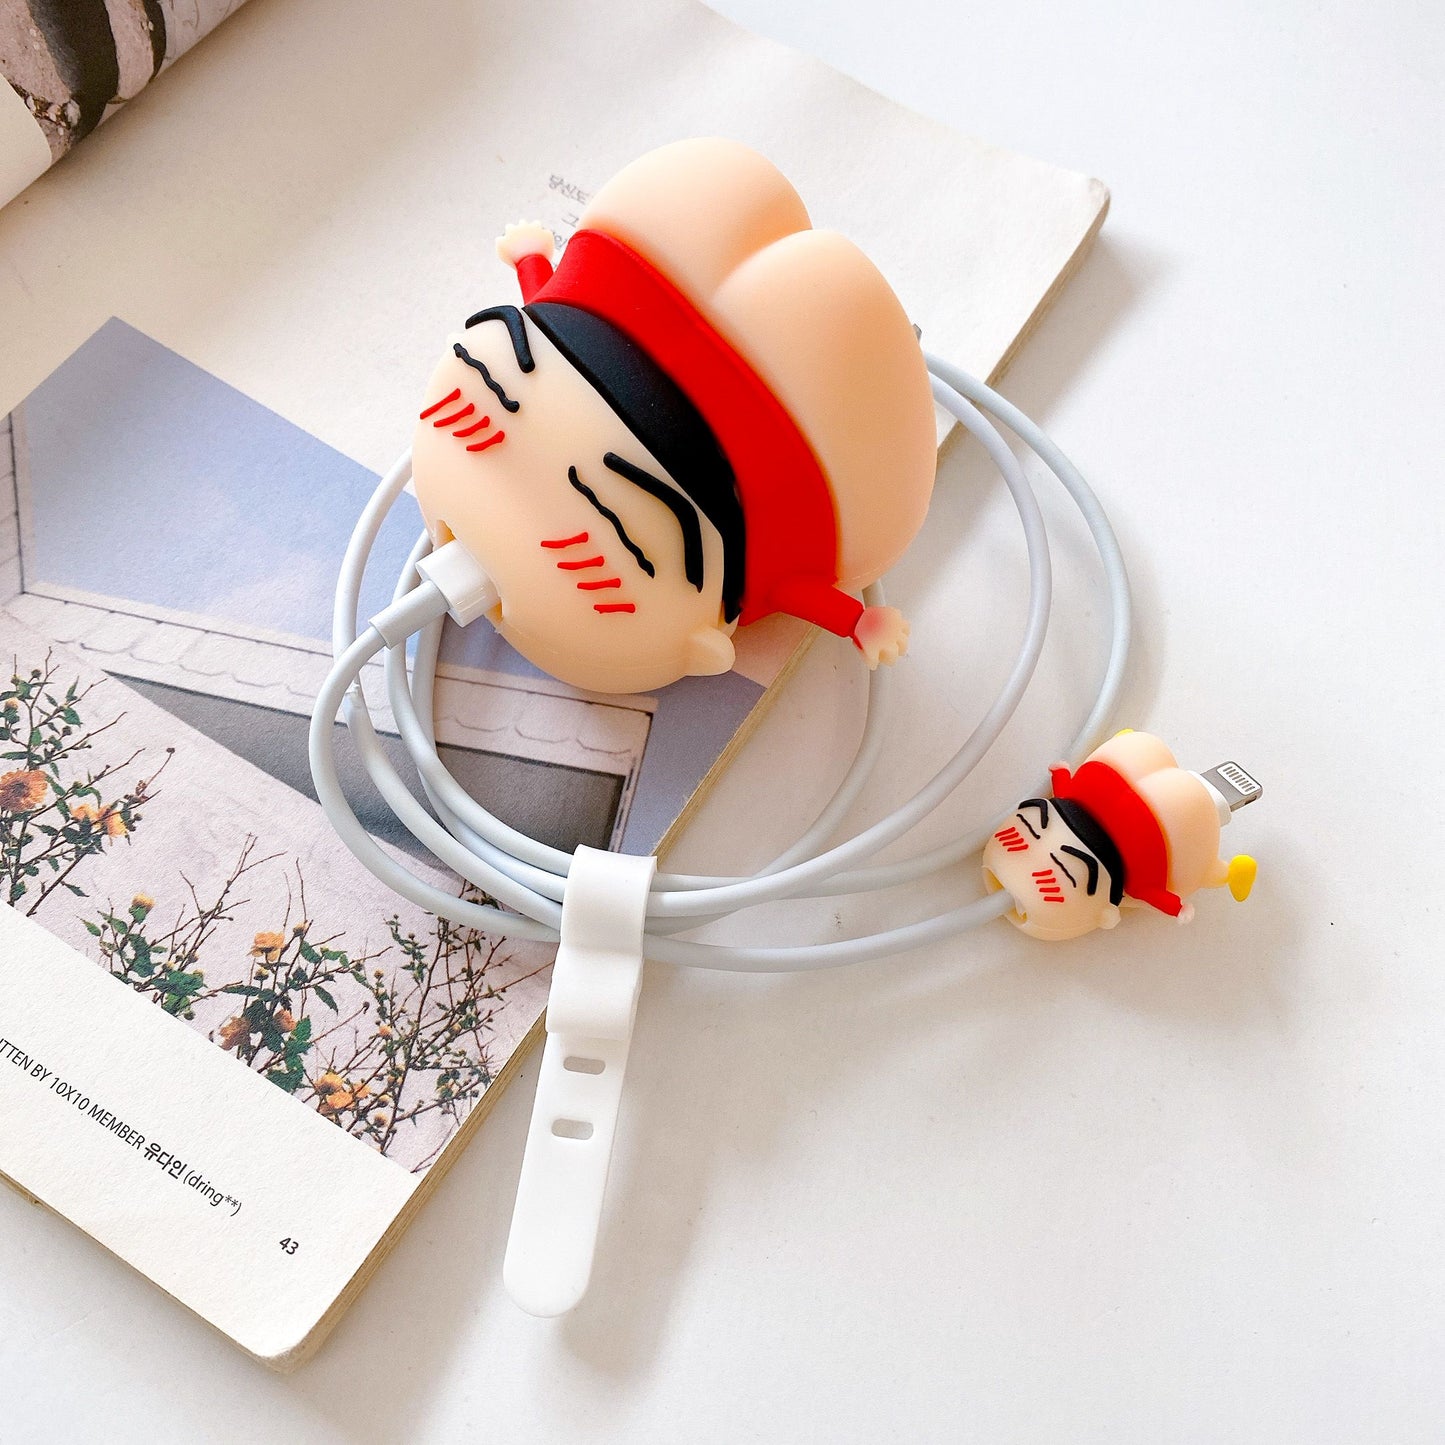 Shinchan Silicon Apple iPhone Charger Case | Lightning Charger/Cable Protector Cover for iPhone Charger- Shinchan